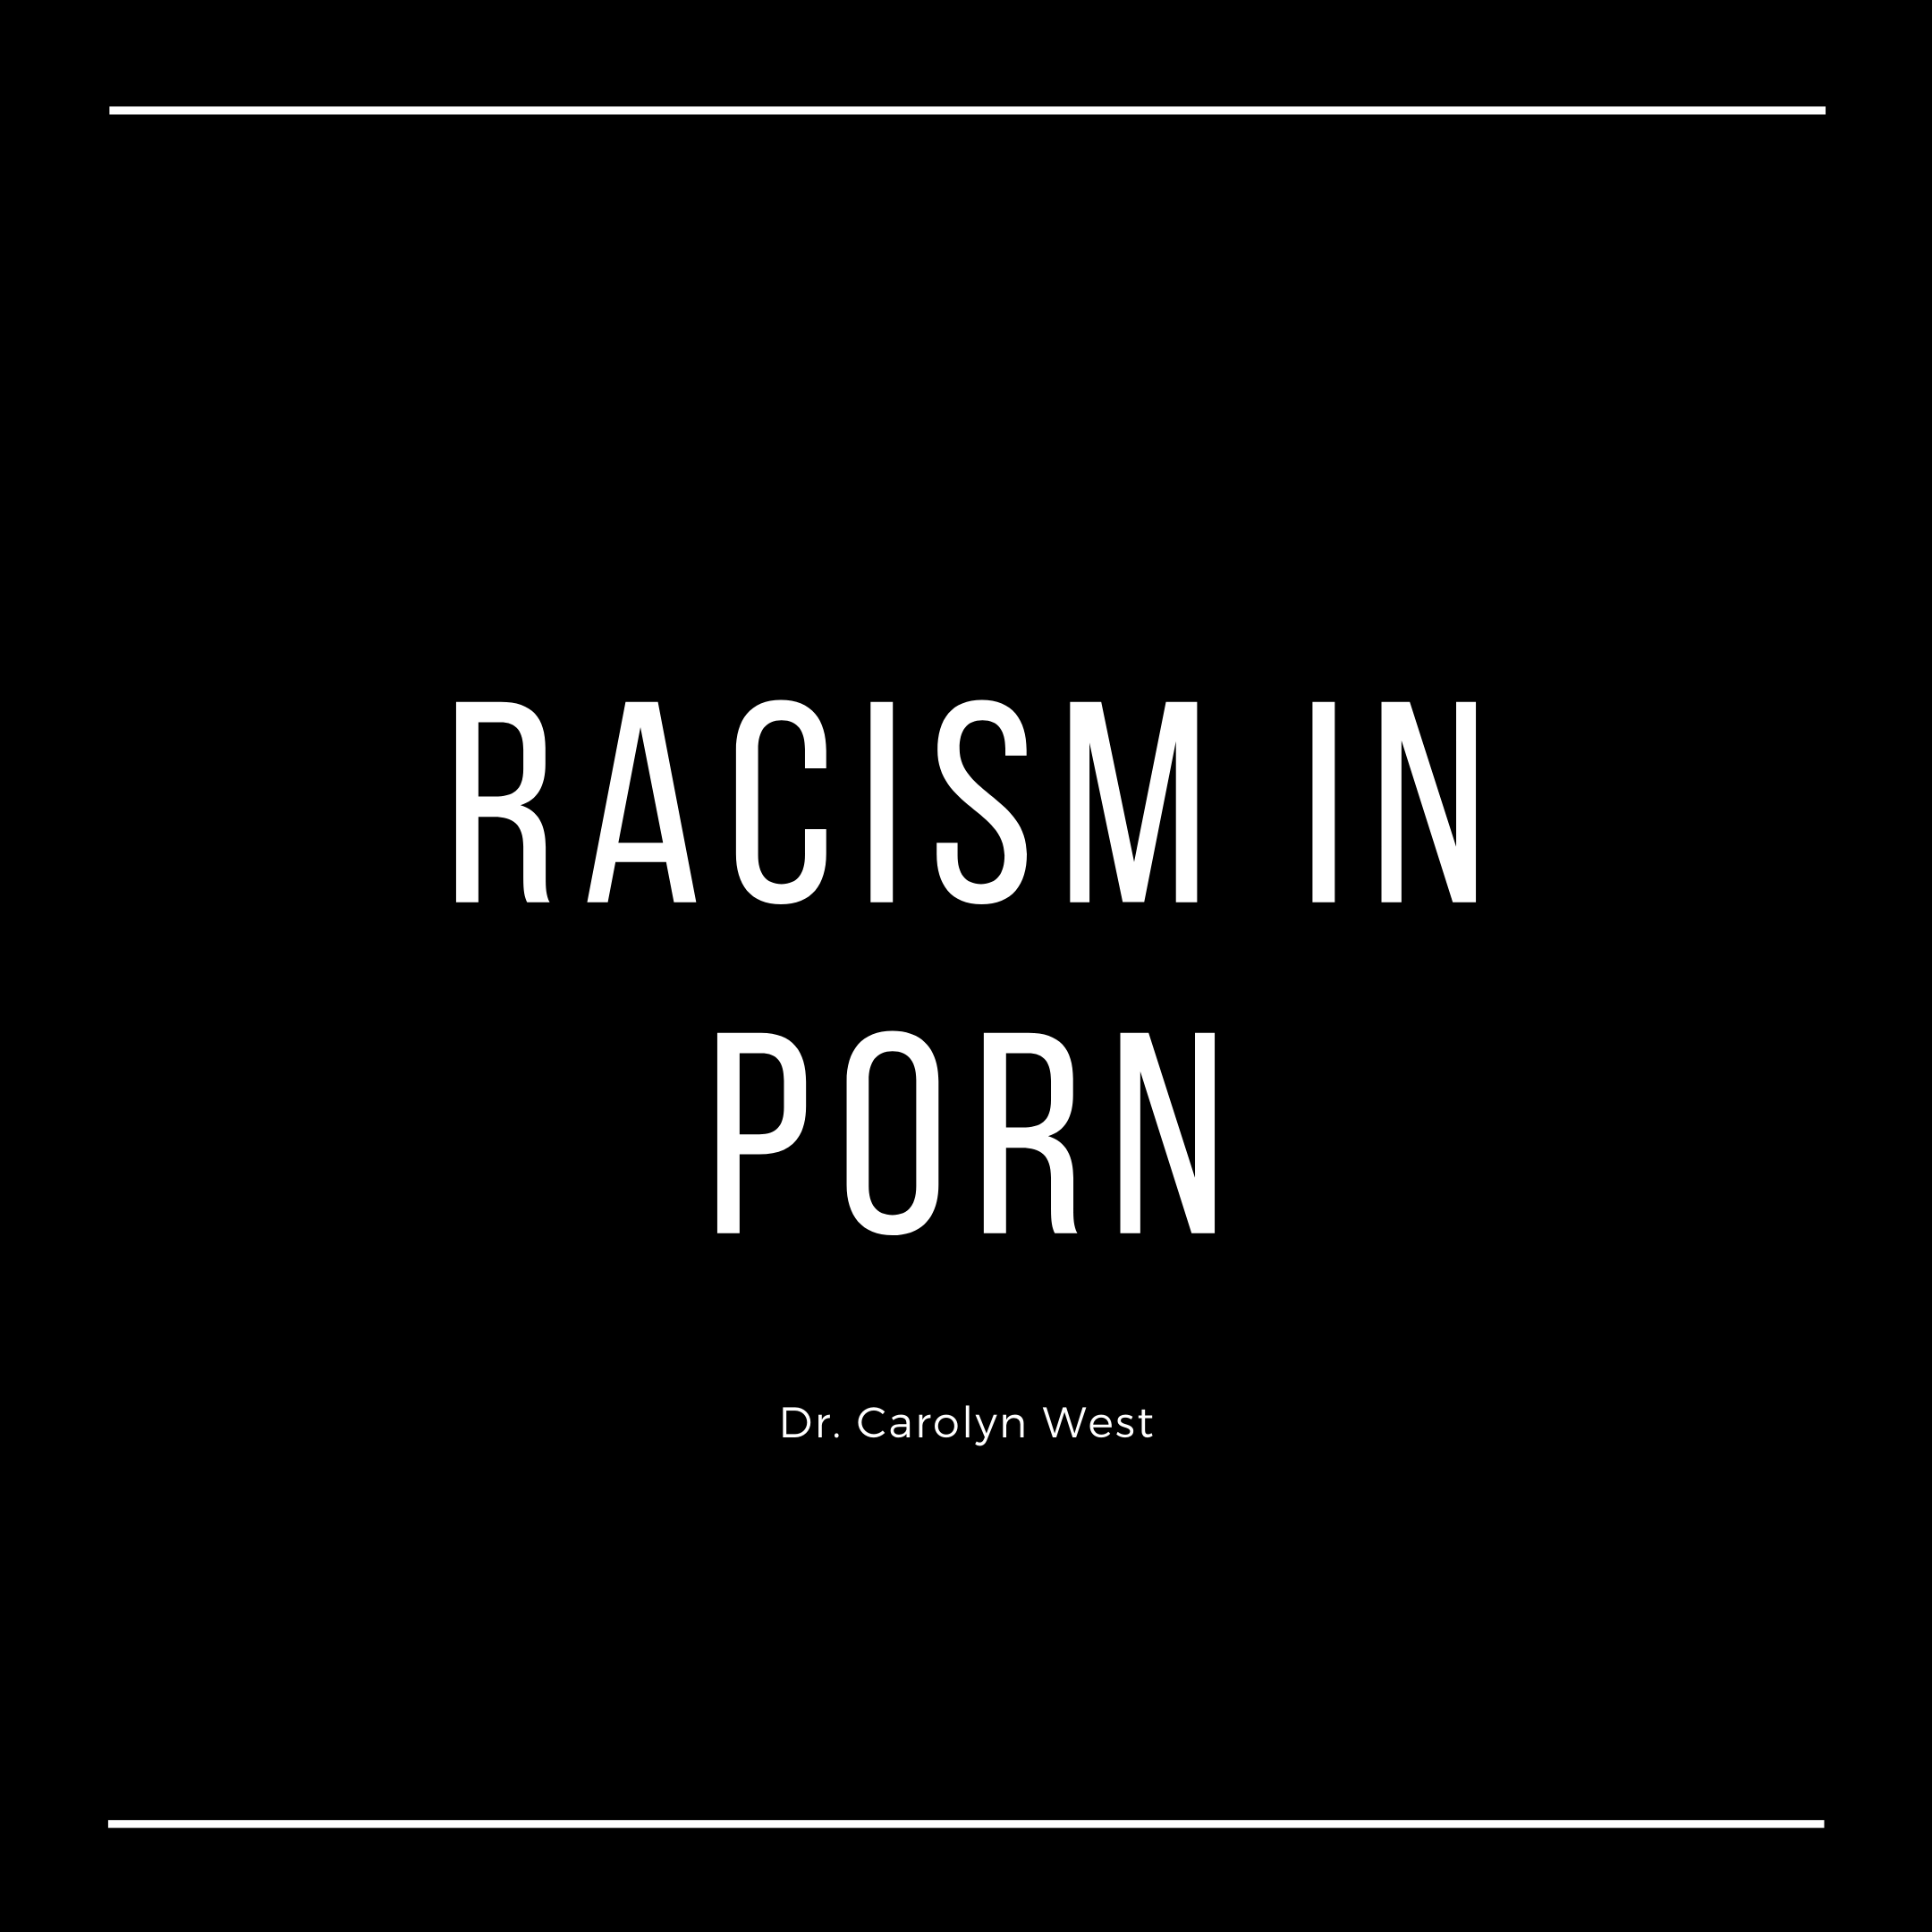 Racism In Porn